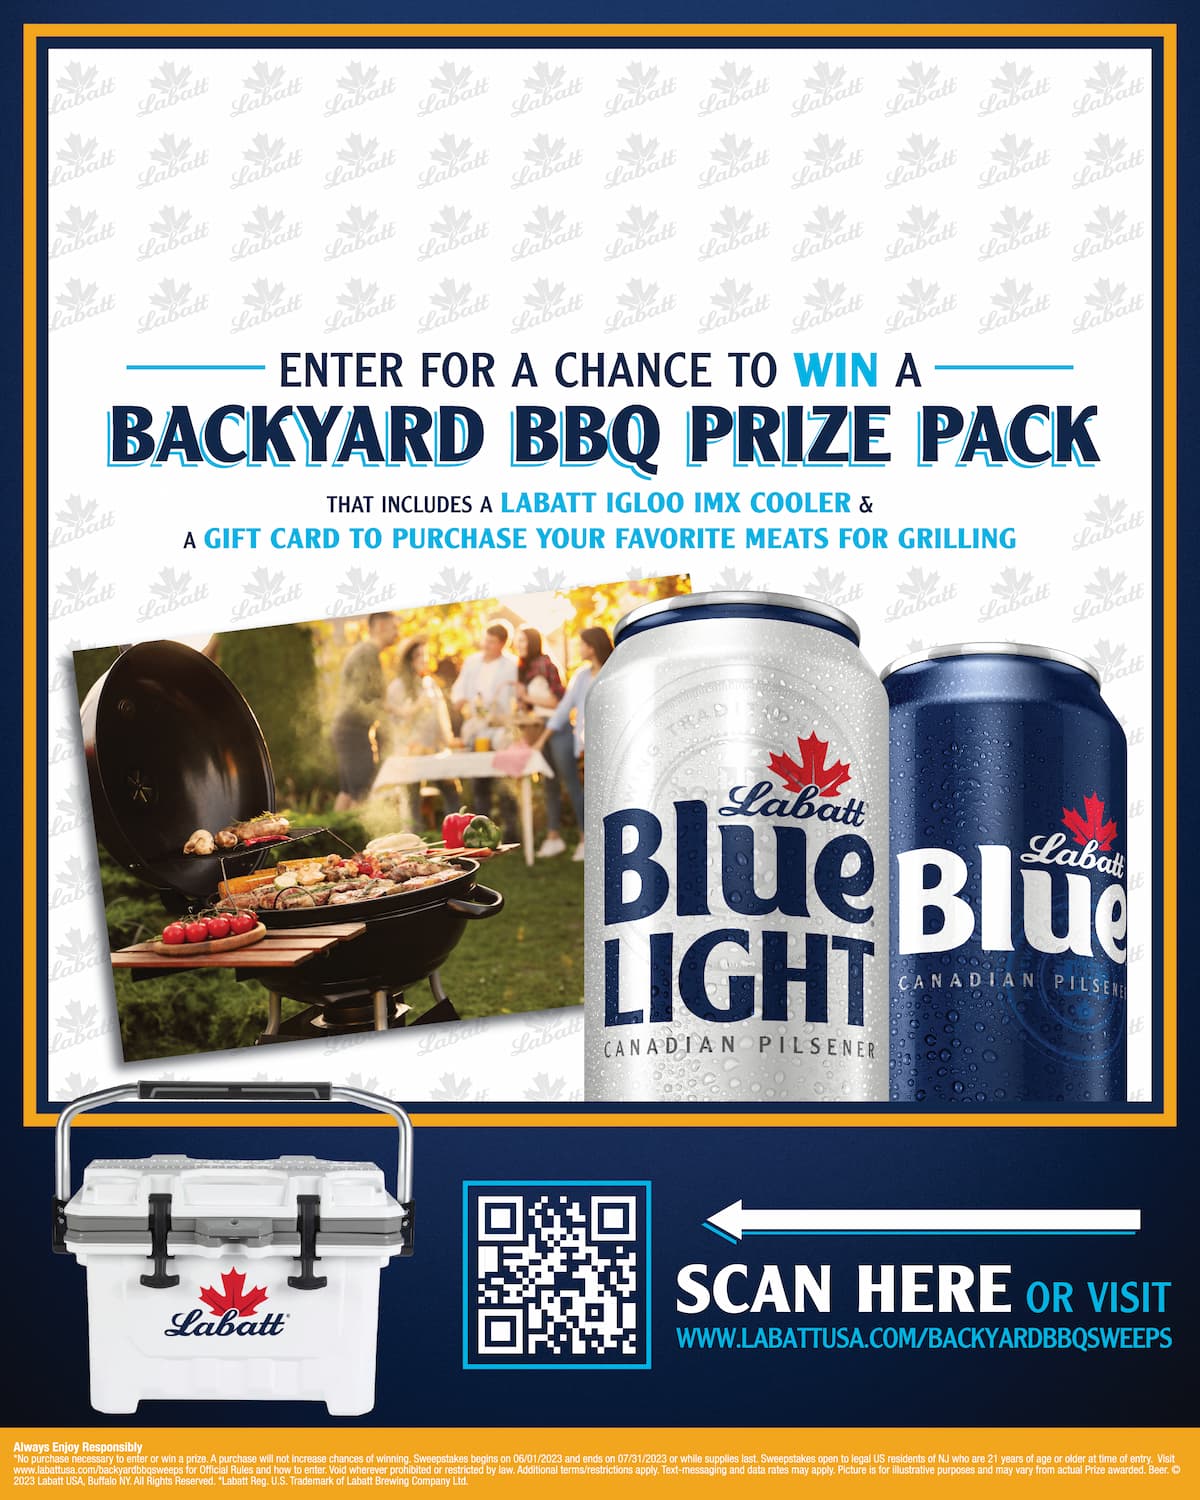 Graphic collage featuring blue and blue light cans, a grill and the Labatt branded IGLOO IMX cooler